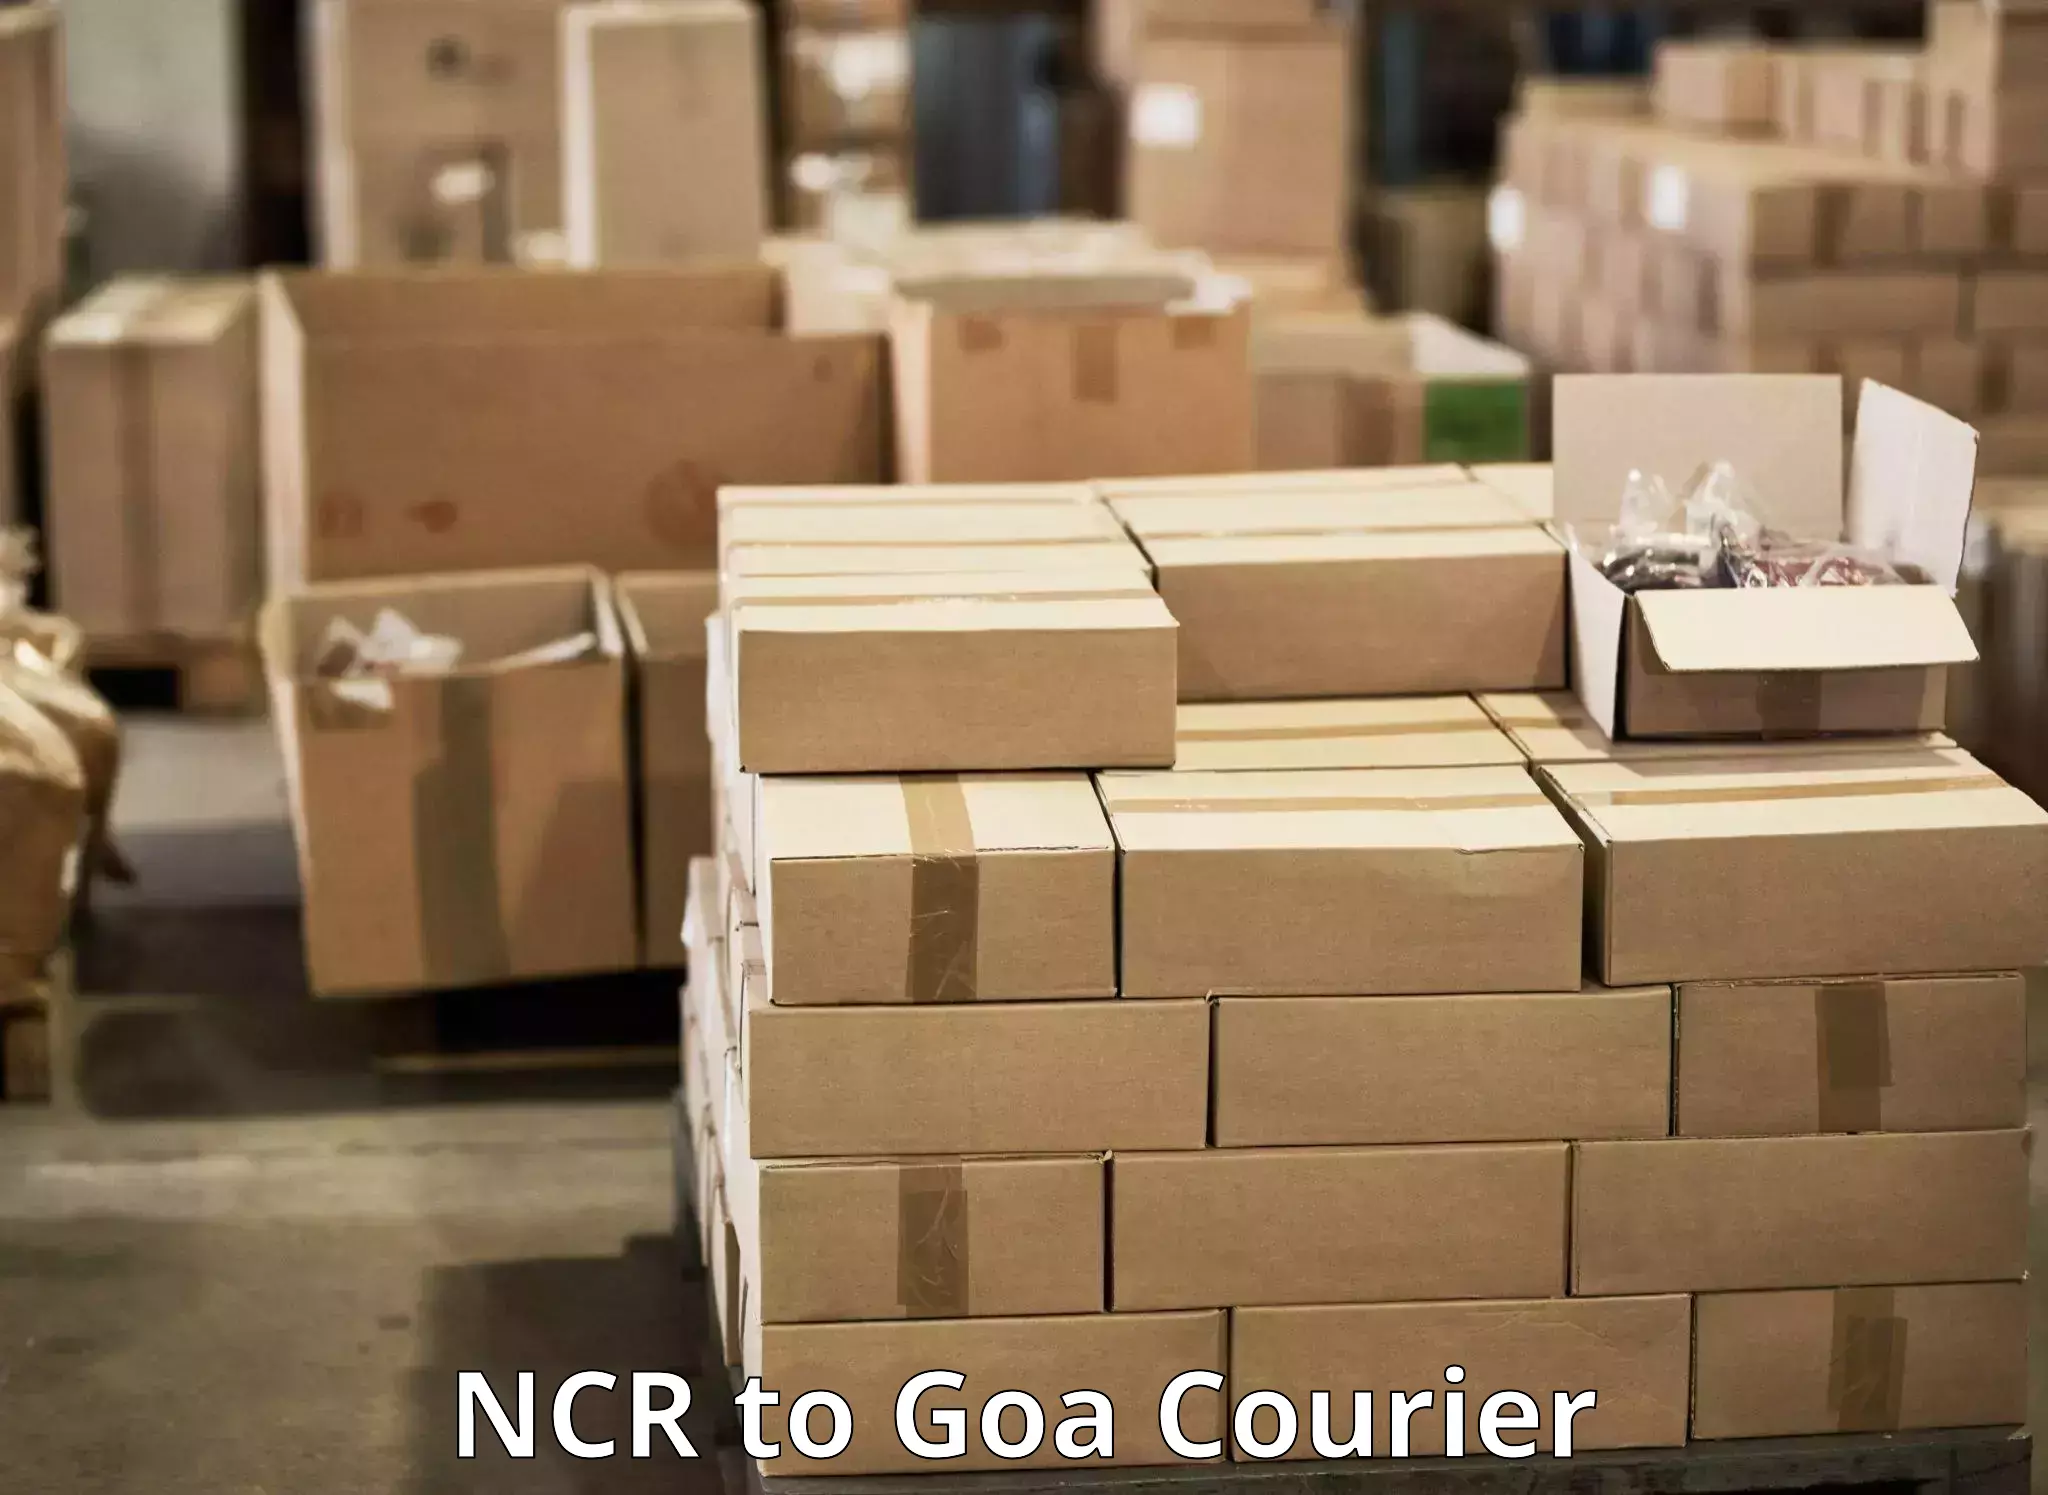 Express package transport NCR to Goa